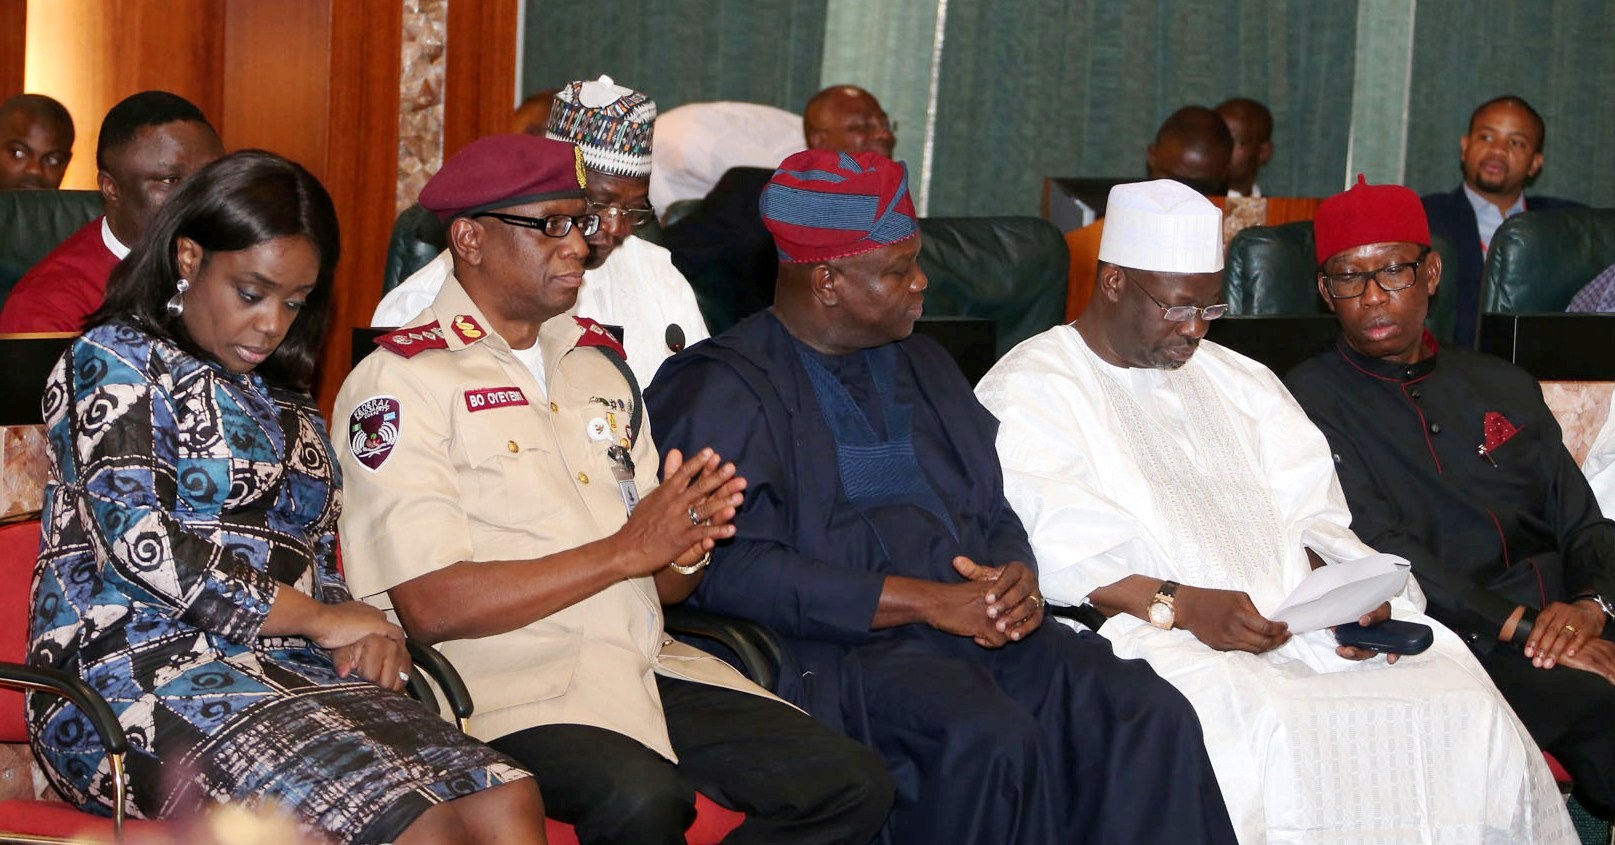 Lagos State Governor & representative of South West Zone on National Road Safety Advisory Council (NARSAC), Mr. Akinwunmi Ambode (middle), with his Gombe and Delta States counterpart, Governor Ibrahim Dankwambo (2nd right), Governor Ifeanyi Okowa (right); Corp Marshal/Chief Executive, Federal Road Safety Corps (FRSC), Mr. Boboye Oyeyemi (2nd left) and Minister of Finance, Mrs. Kemi Adeosun (left) during the inauguration of NARSAC at the Council Chamber, State House, Abuja, on Thursday, February 16, 2017.